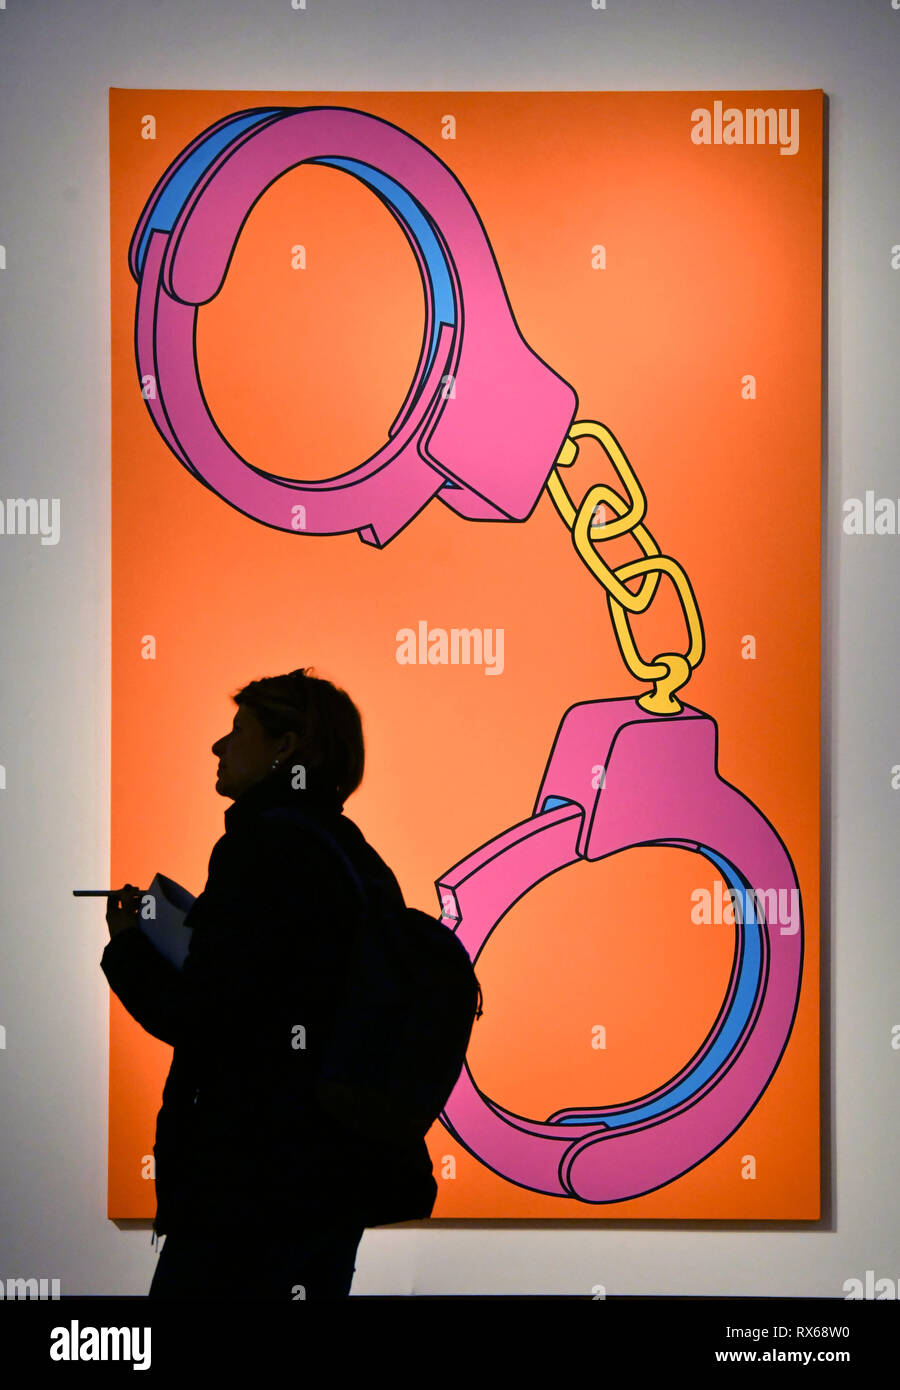 PLEASE NOTE ALL IMAGES UNDER EMBARGO UNTIL FRIDAY 8 MARCH AT 23:00. London, UK. 8th Mar 2019.  Michael Craig-Martin, Handcuffs, estimate £30,000-50,000 at Christie’s exhibition of art from the collection of the late George Michael, featuring works by Damien Hirst, Tracey Emin and Marc Quinn, from its upcoming The George Michael Collection Evening and Online Auctions, on view to the public from 9-15 March 2019. Credit: Nils Jorgensen/Alamy Live News Stock Photo